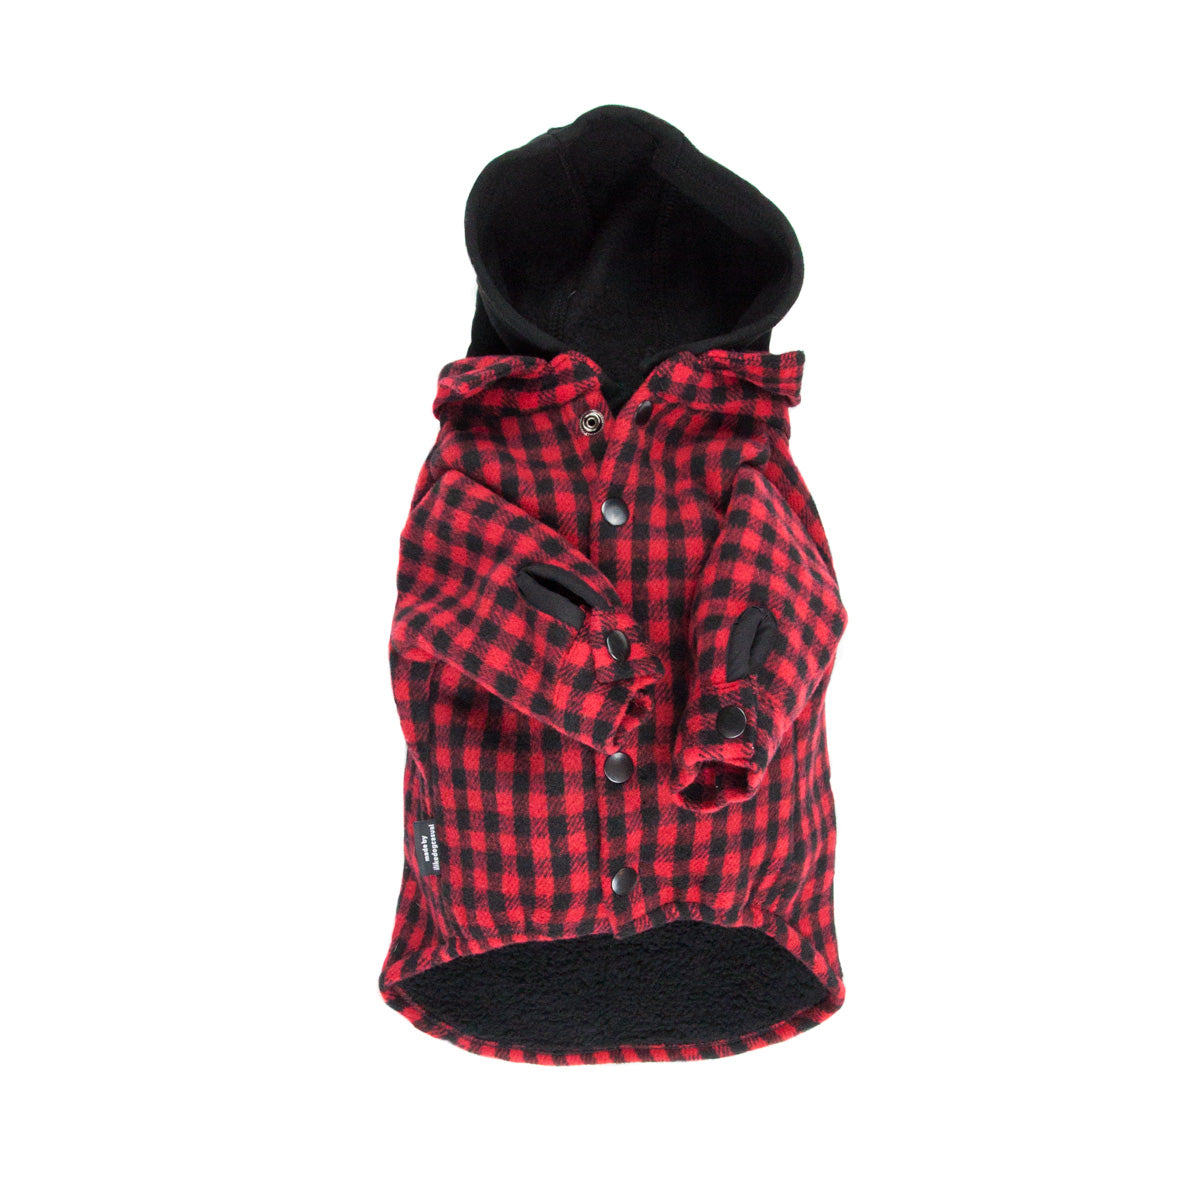 red and black plaid jacket with hood